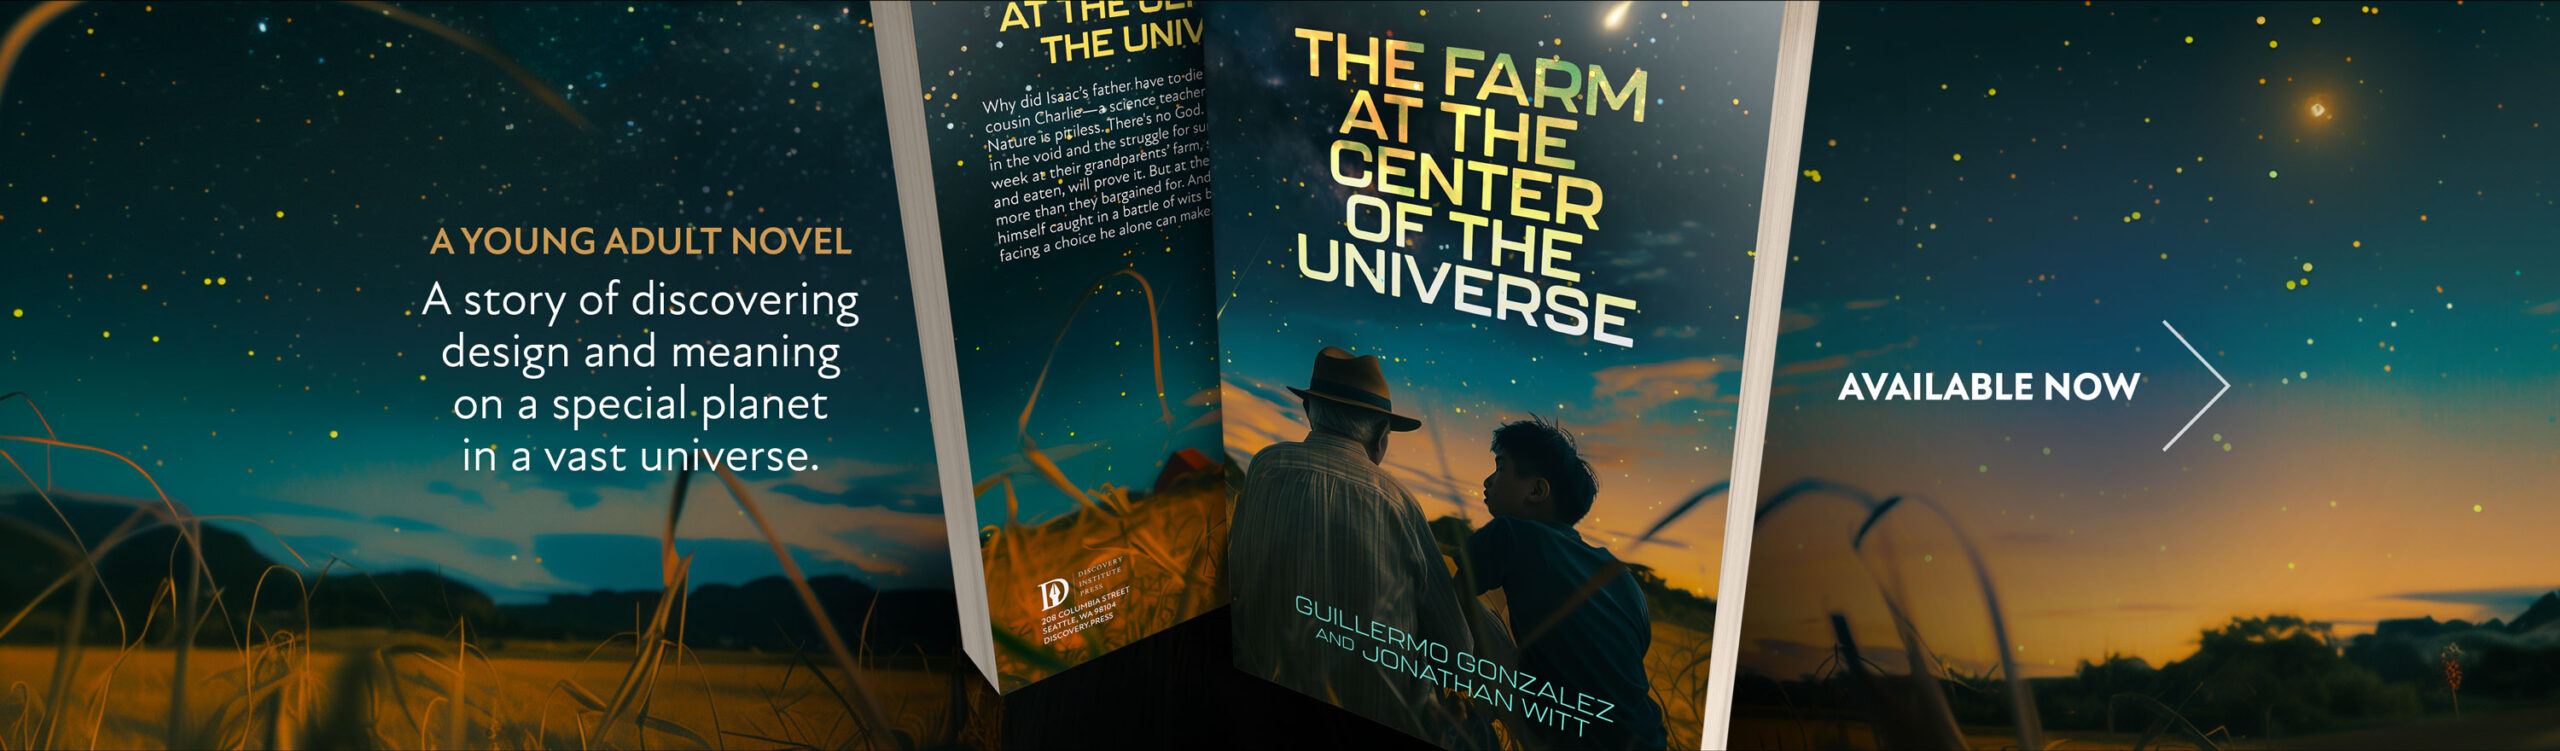 Promotional slide for The Farm at the Center of the Universe